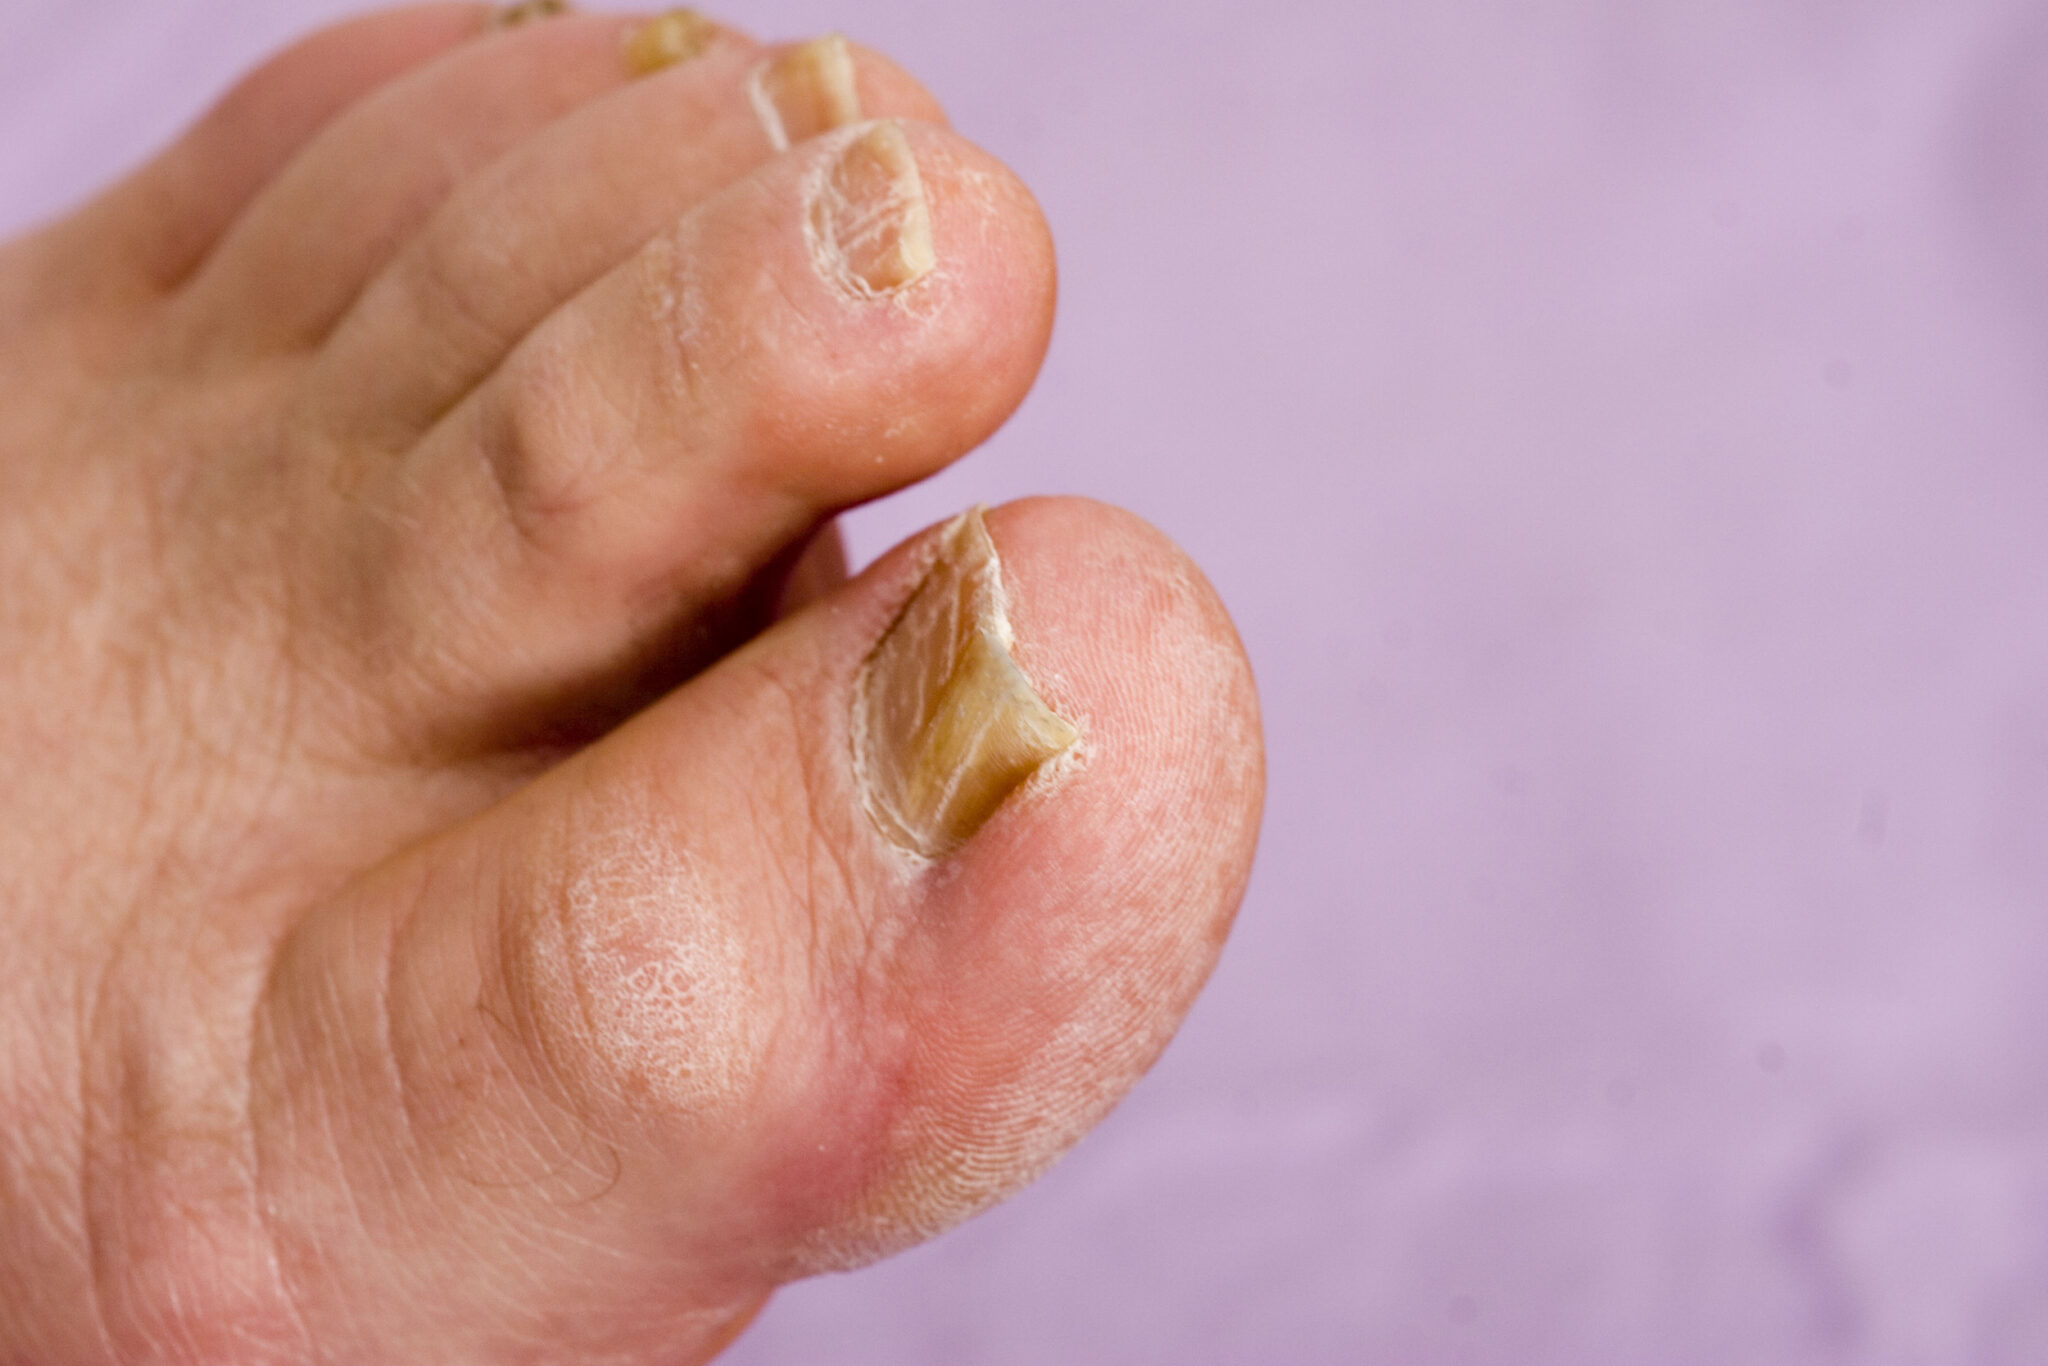 what is athletes foot what causes the fungal infection and why does it occur between the 3rd and 4th toes